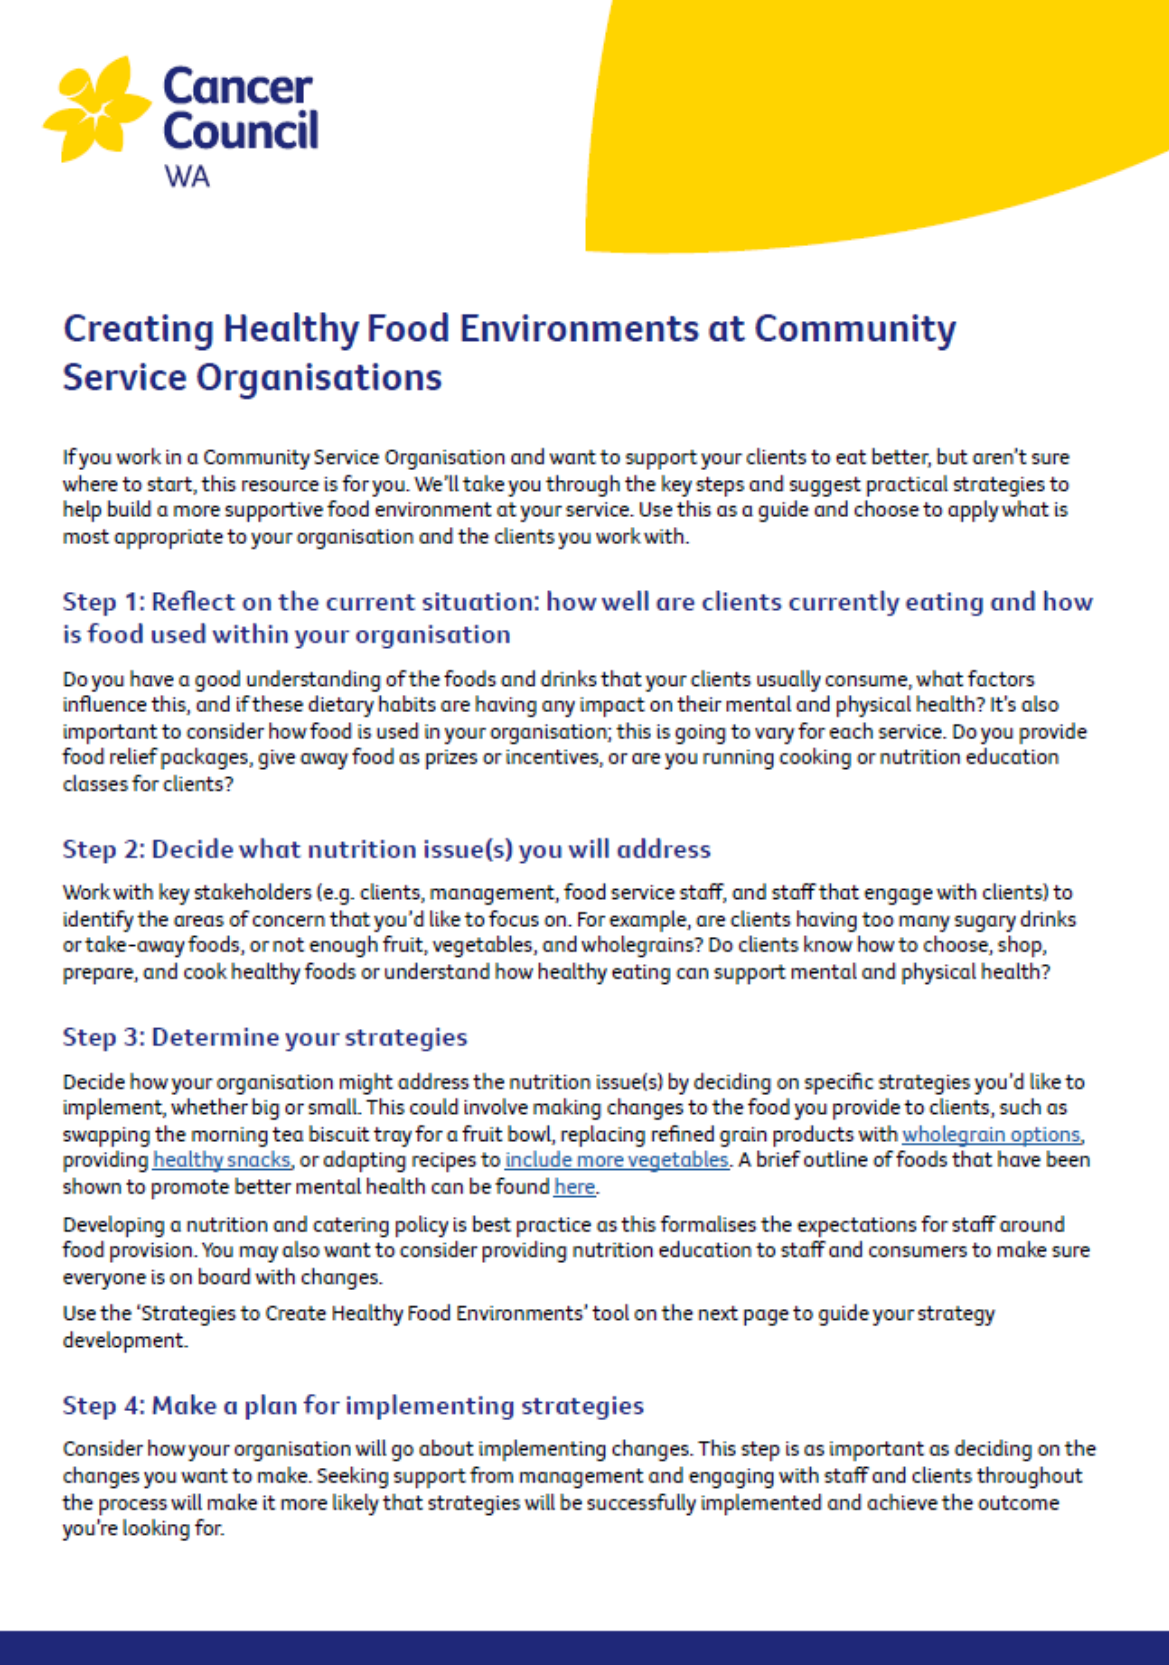 Community and health organisations: Step by step guide to creating healthy food environments pdf thumbnail